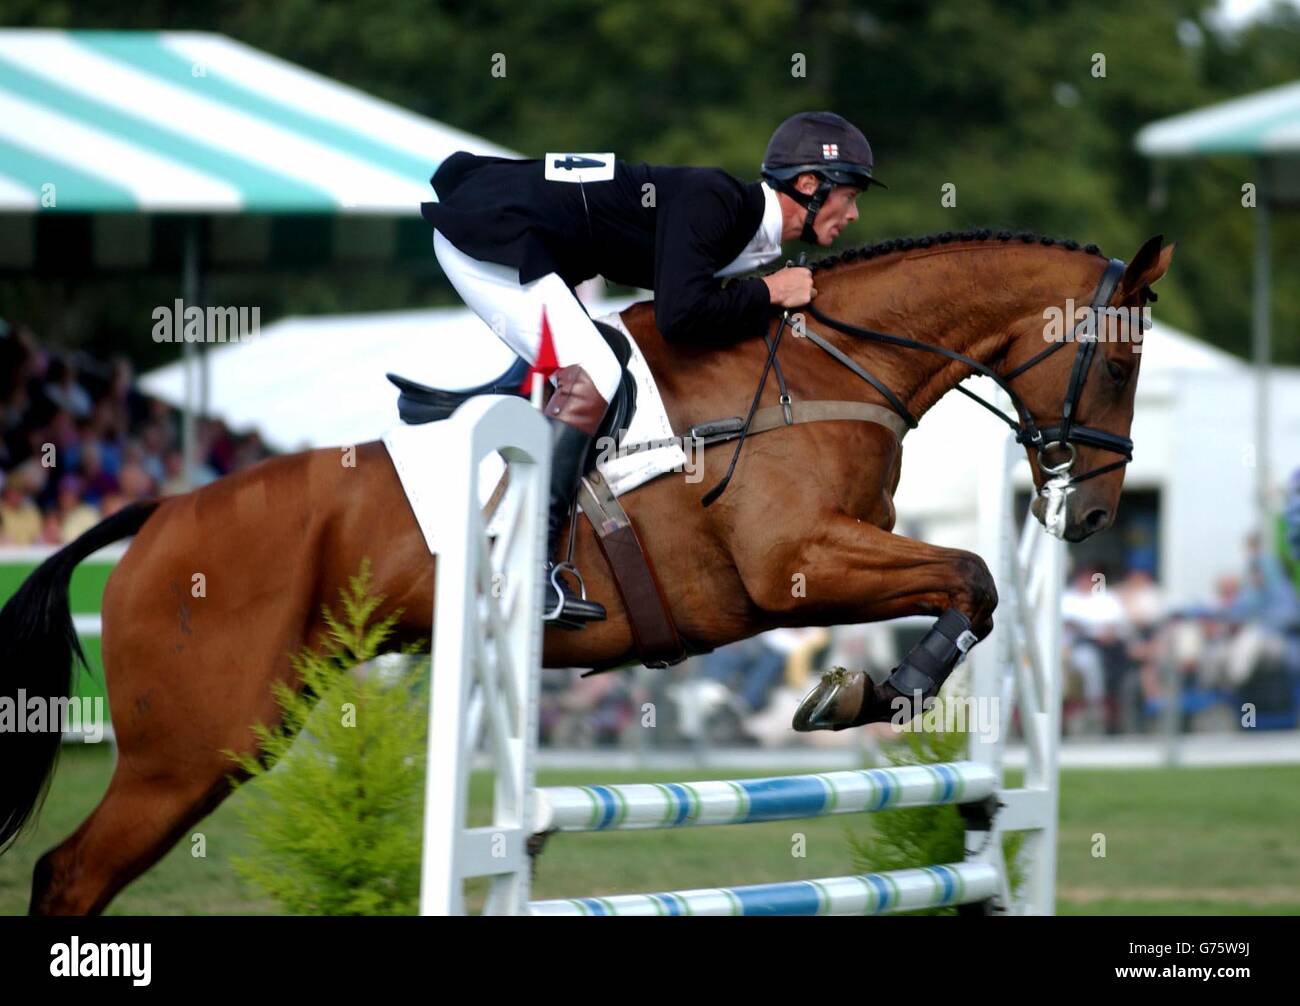 William Fox-Pitt riding Highland Lad during the show jumping event, goes on to win the Burghley Masterfoods Trophy at the Burghley Horse Trials in Cambridgeshire. Stock Photo